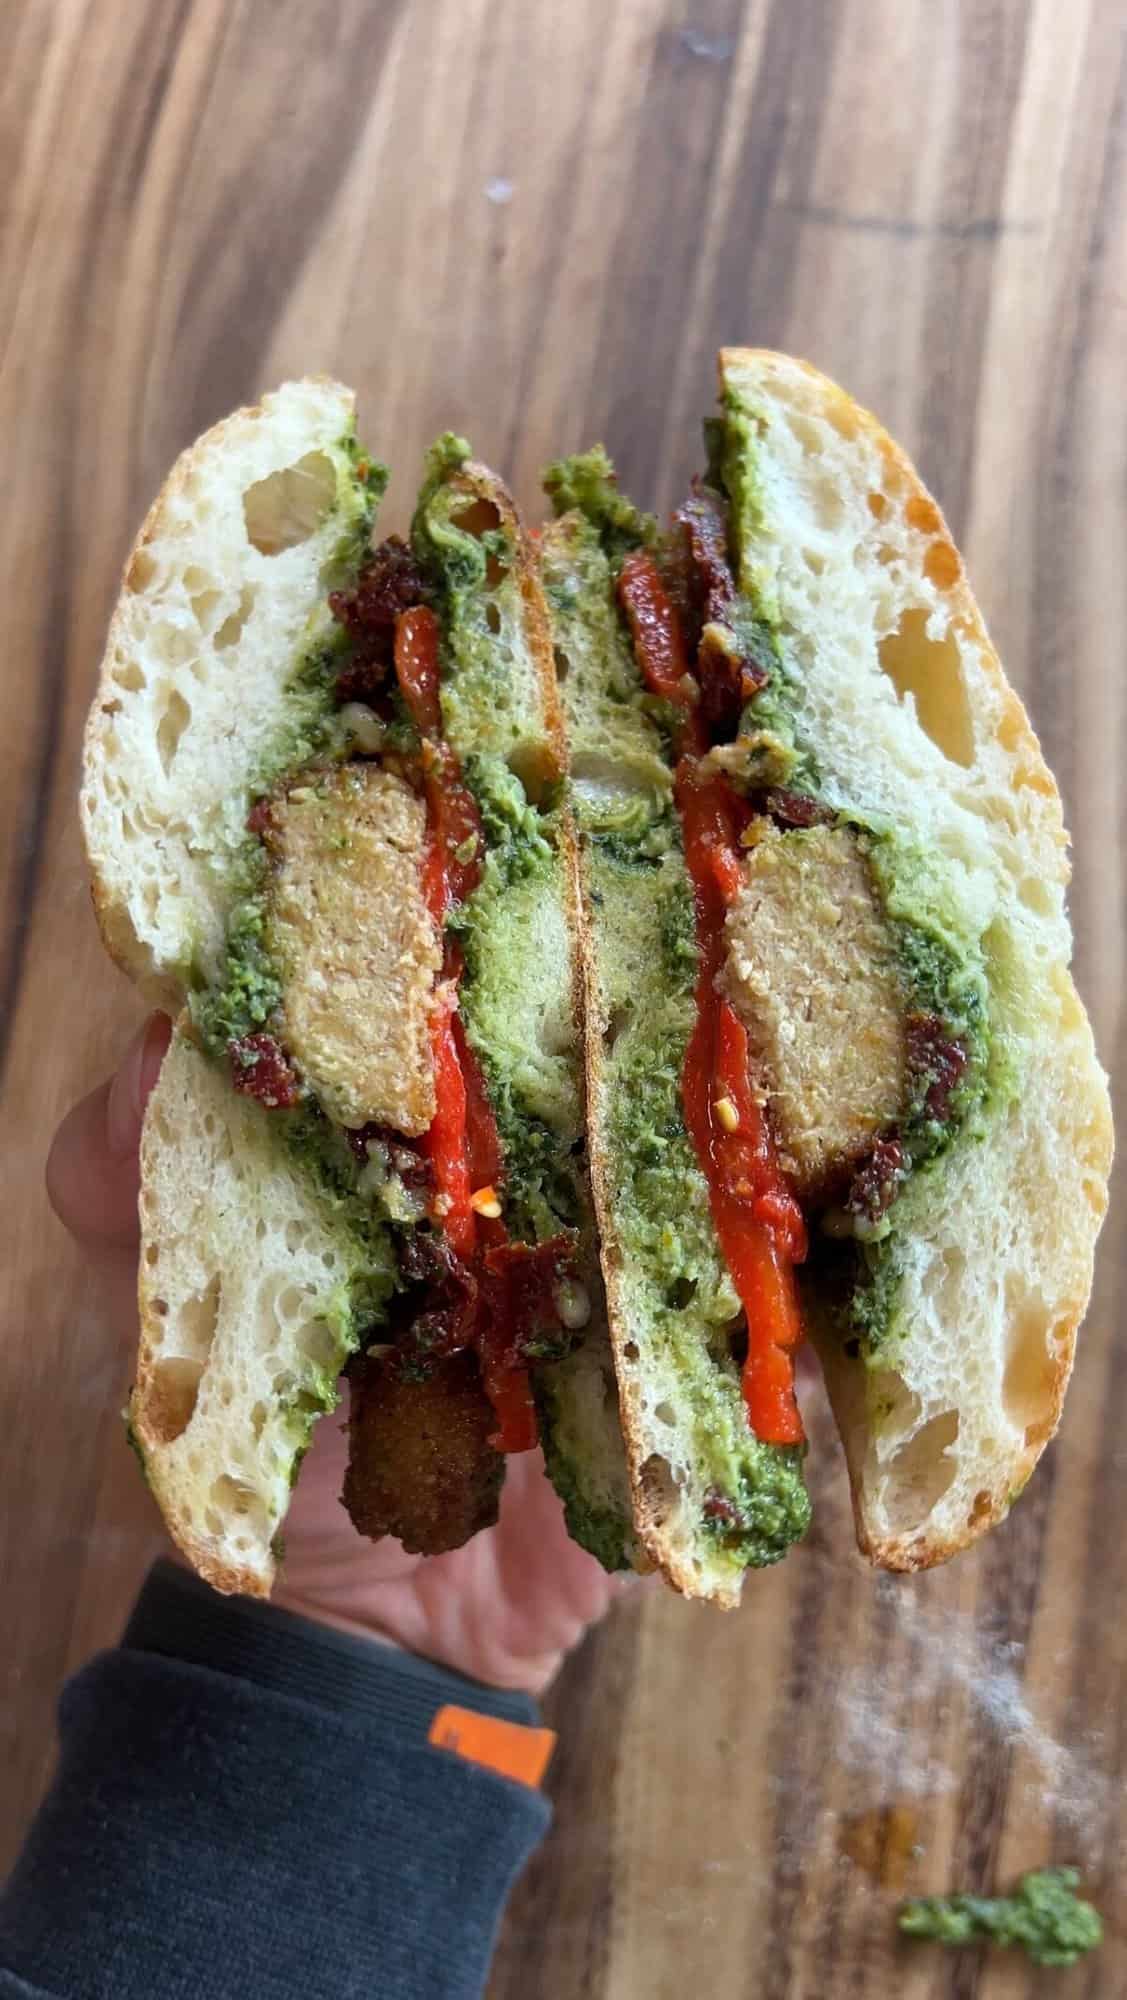 Vegan Chicken Pesto Sandwiches sliced down the middle with cross section showing